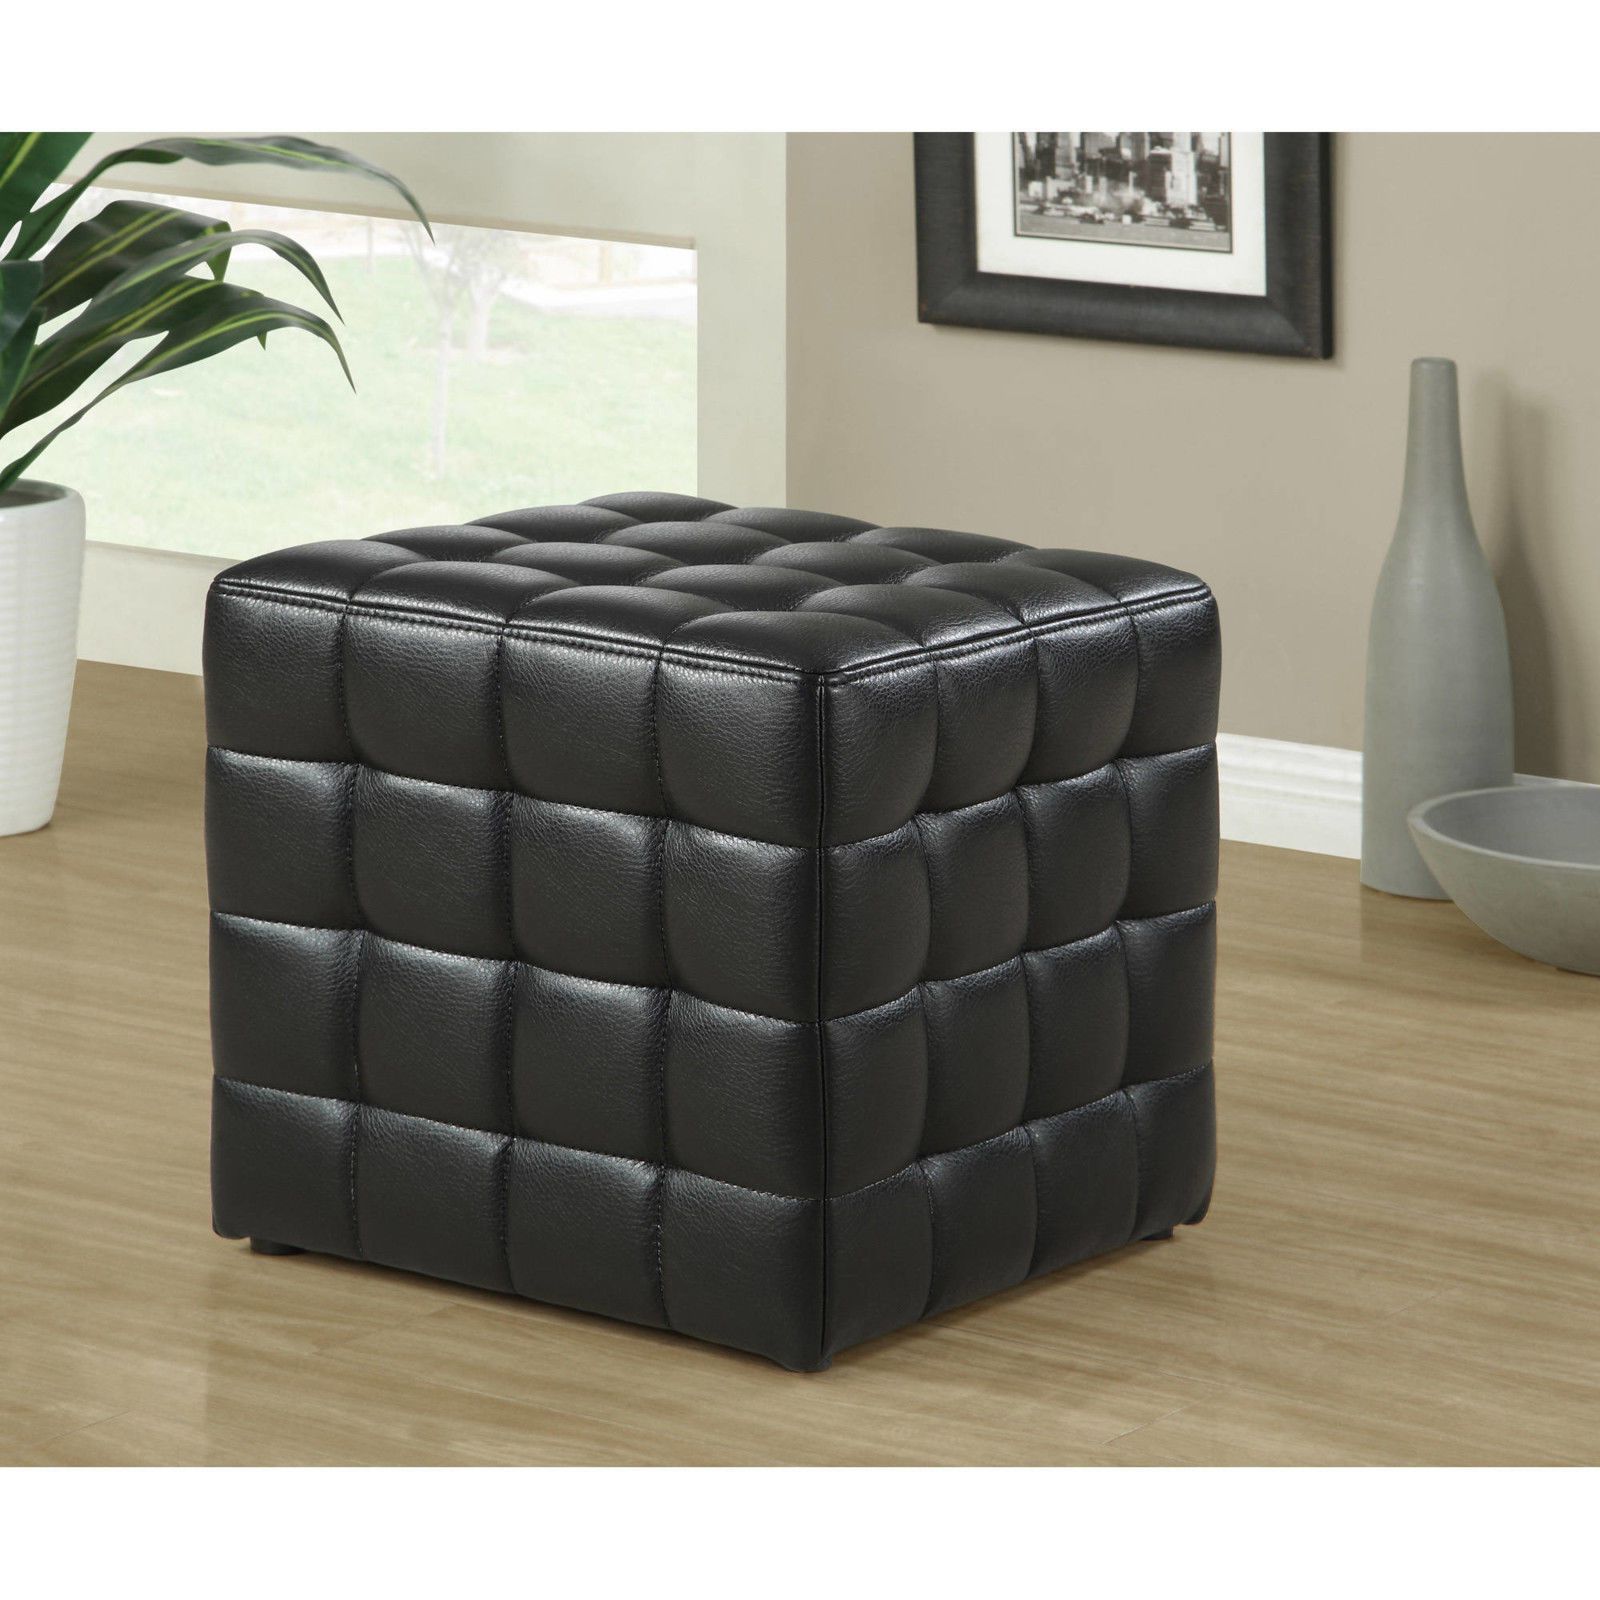 Black Leather Ottoman Chair Tufted Seat Foot Bed Room Stool Furniture Regarding Fashionable Black Leather And Gray Canvas Pouf Ottomans (View 9 of 10)